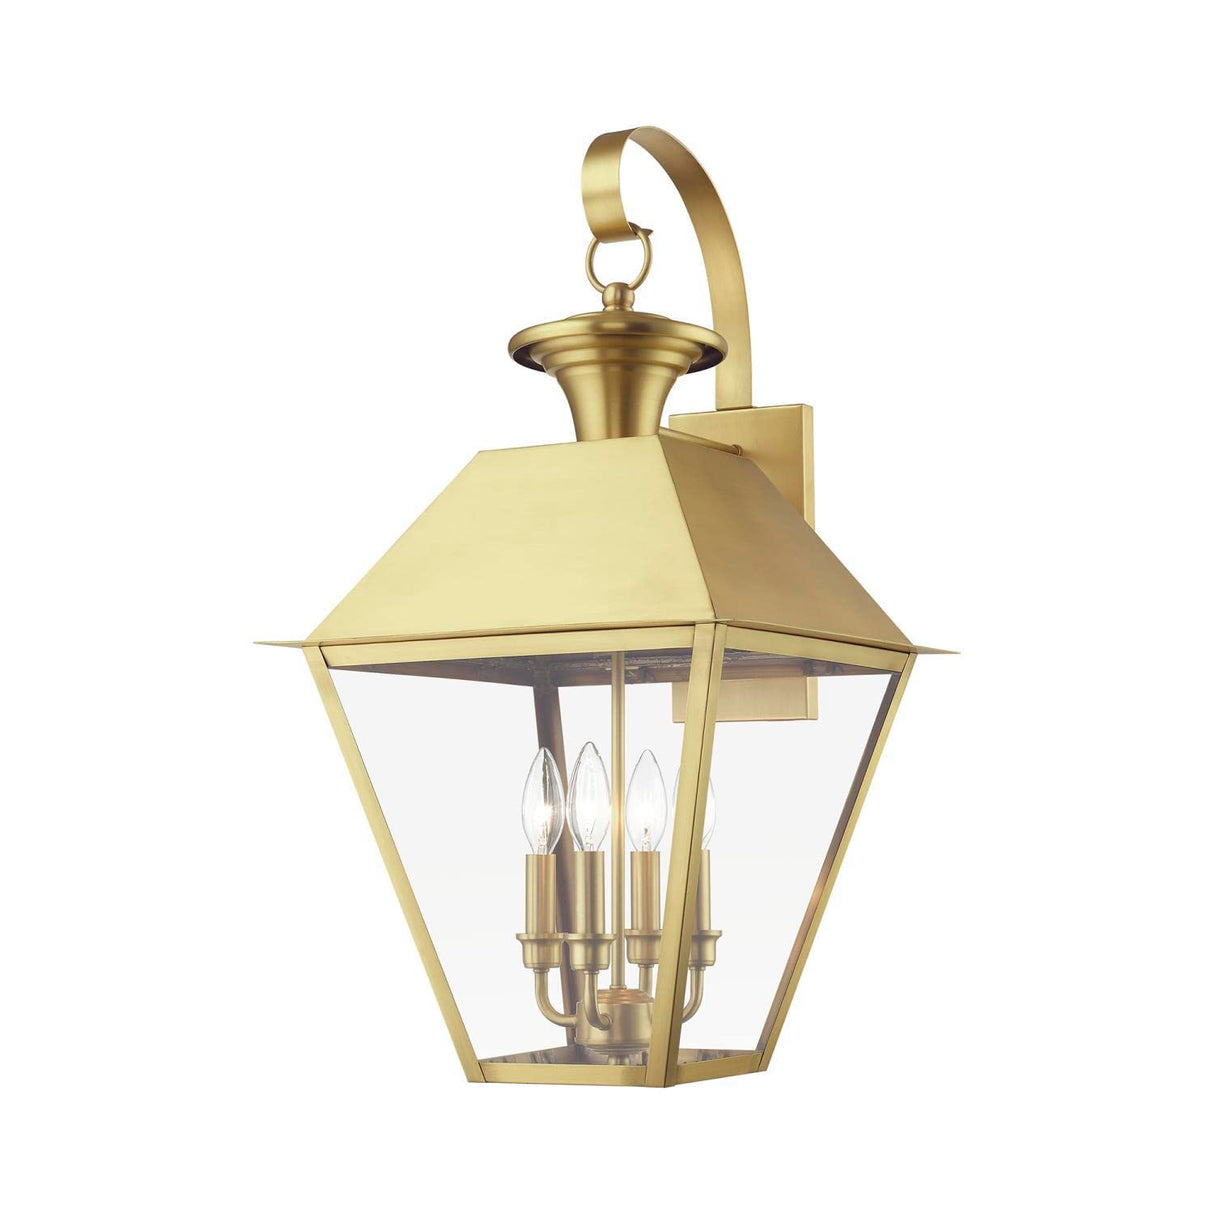 Wentworth 4 Light Outdoor Sconce in Natural Brass (27222-08)